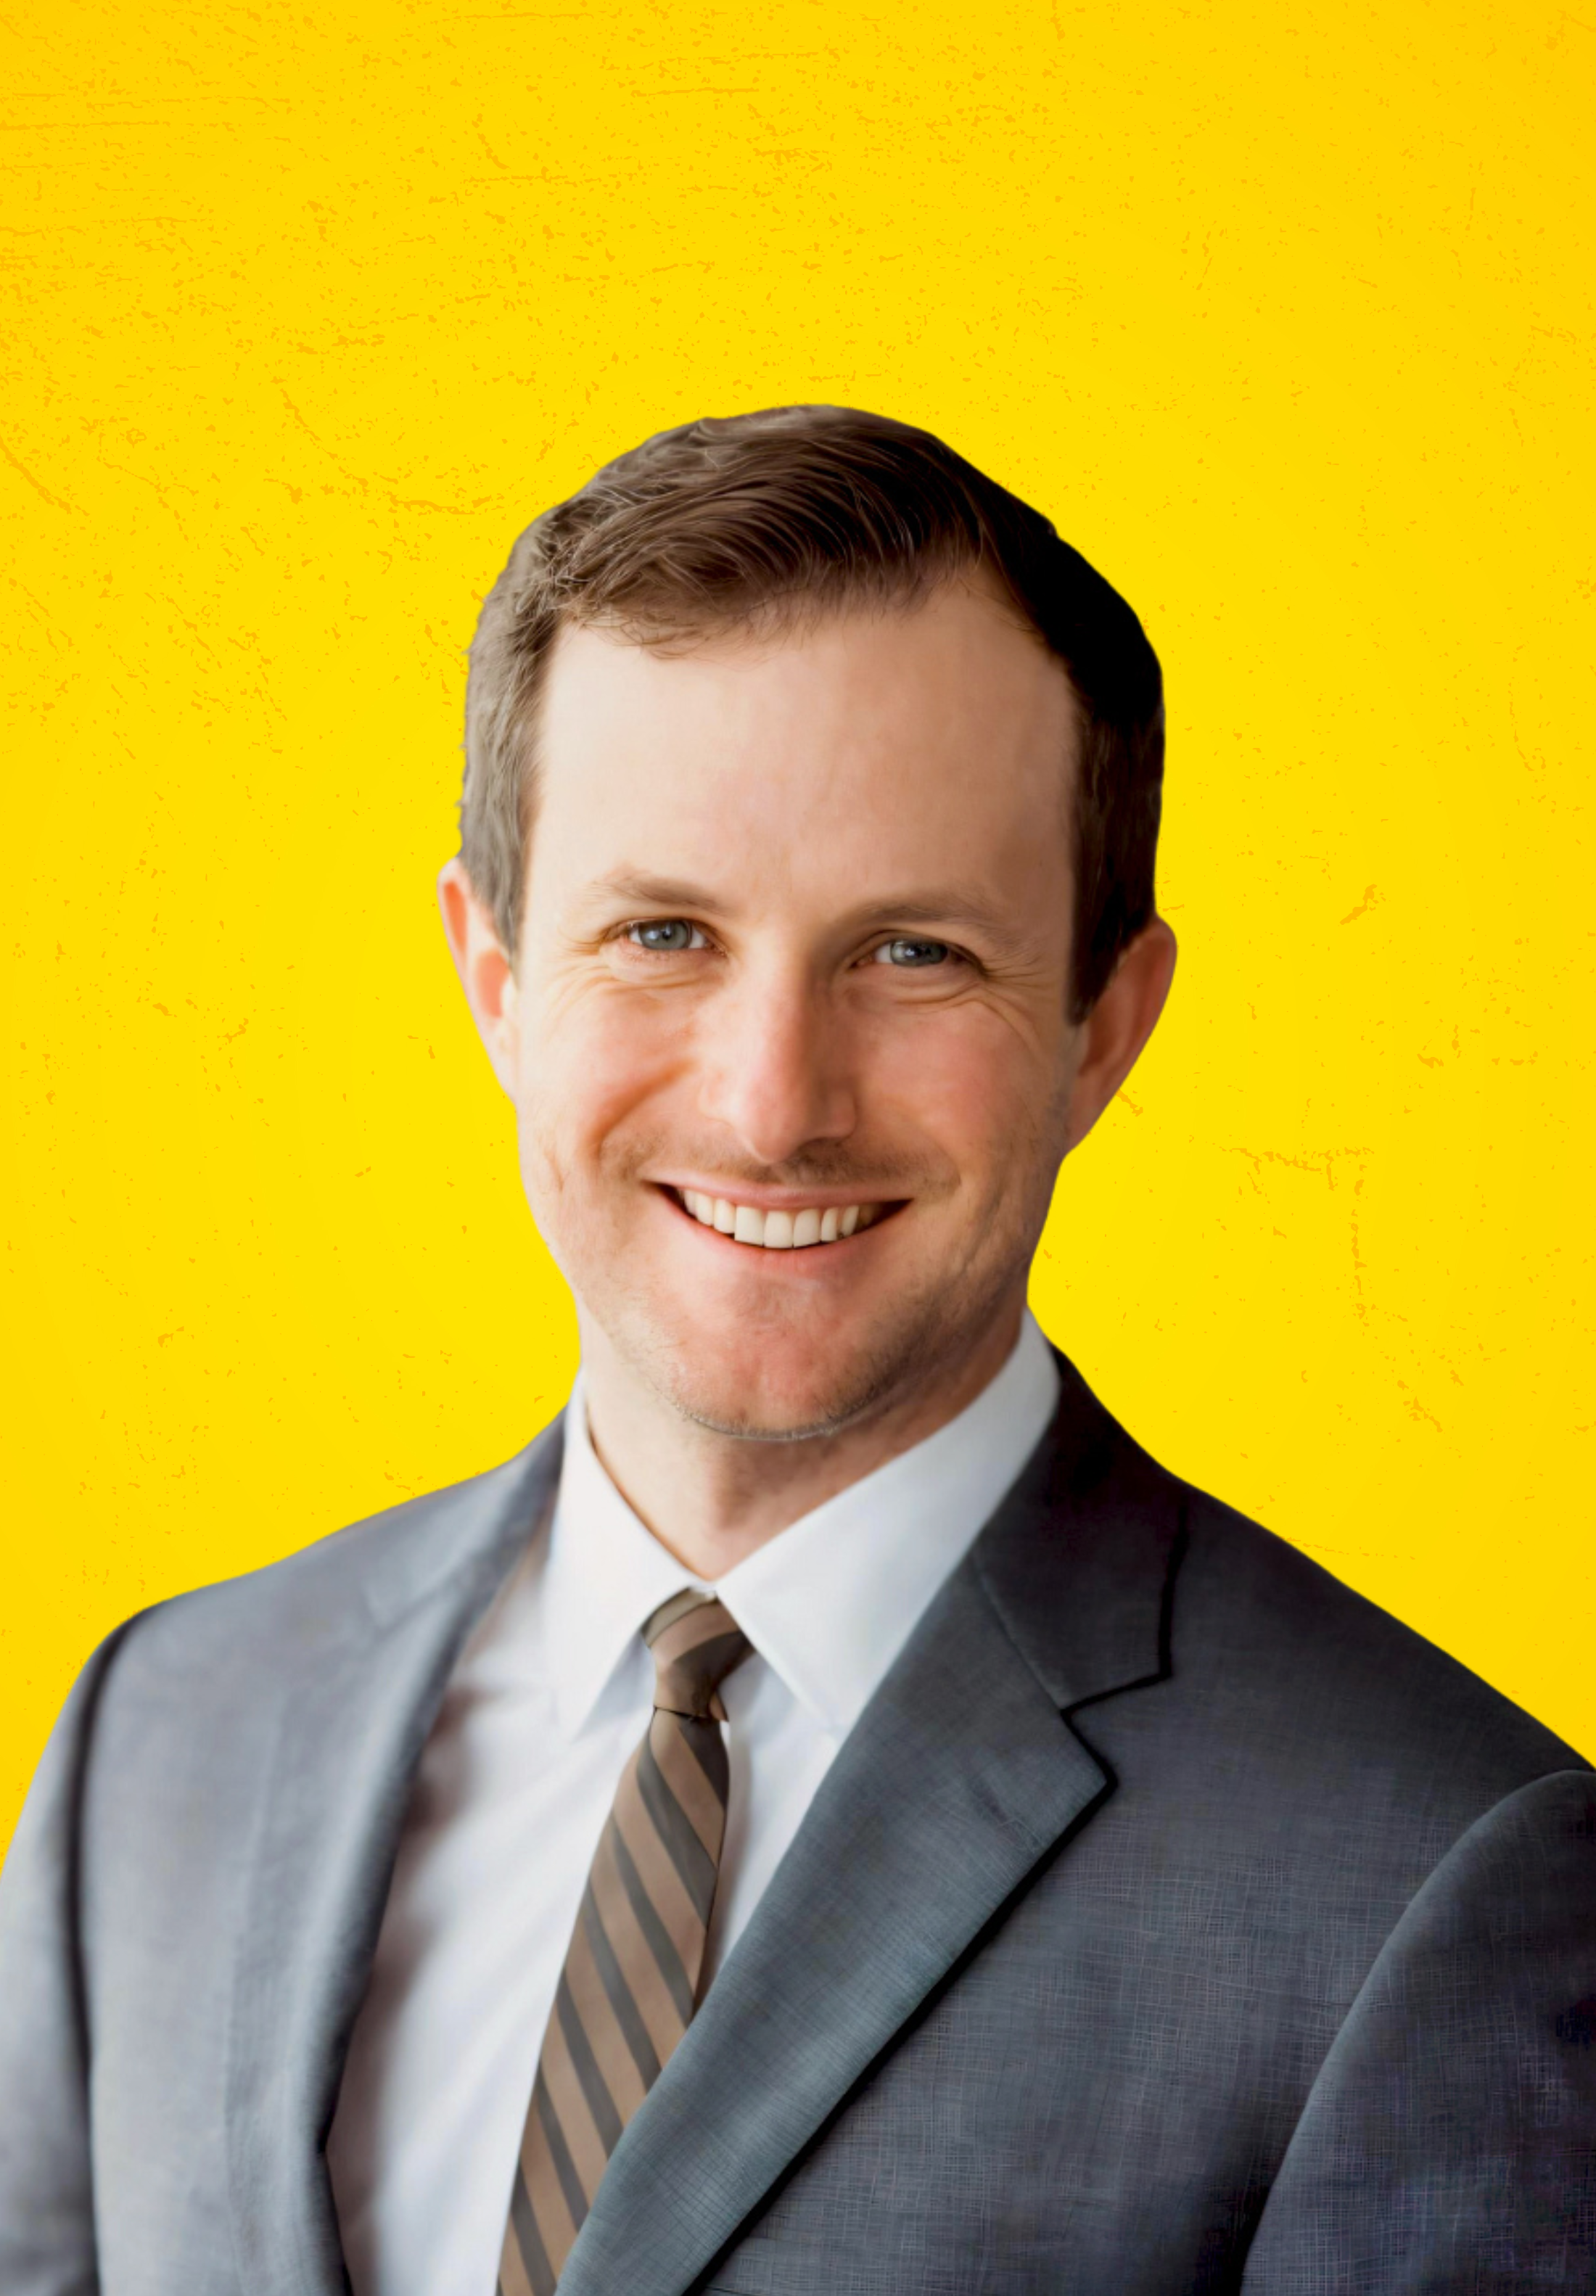 Headshot of Kyle Pendergast with yellow background.